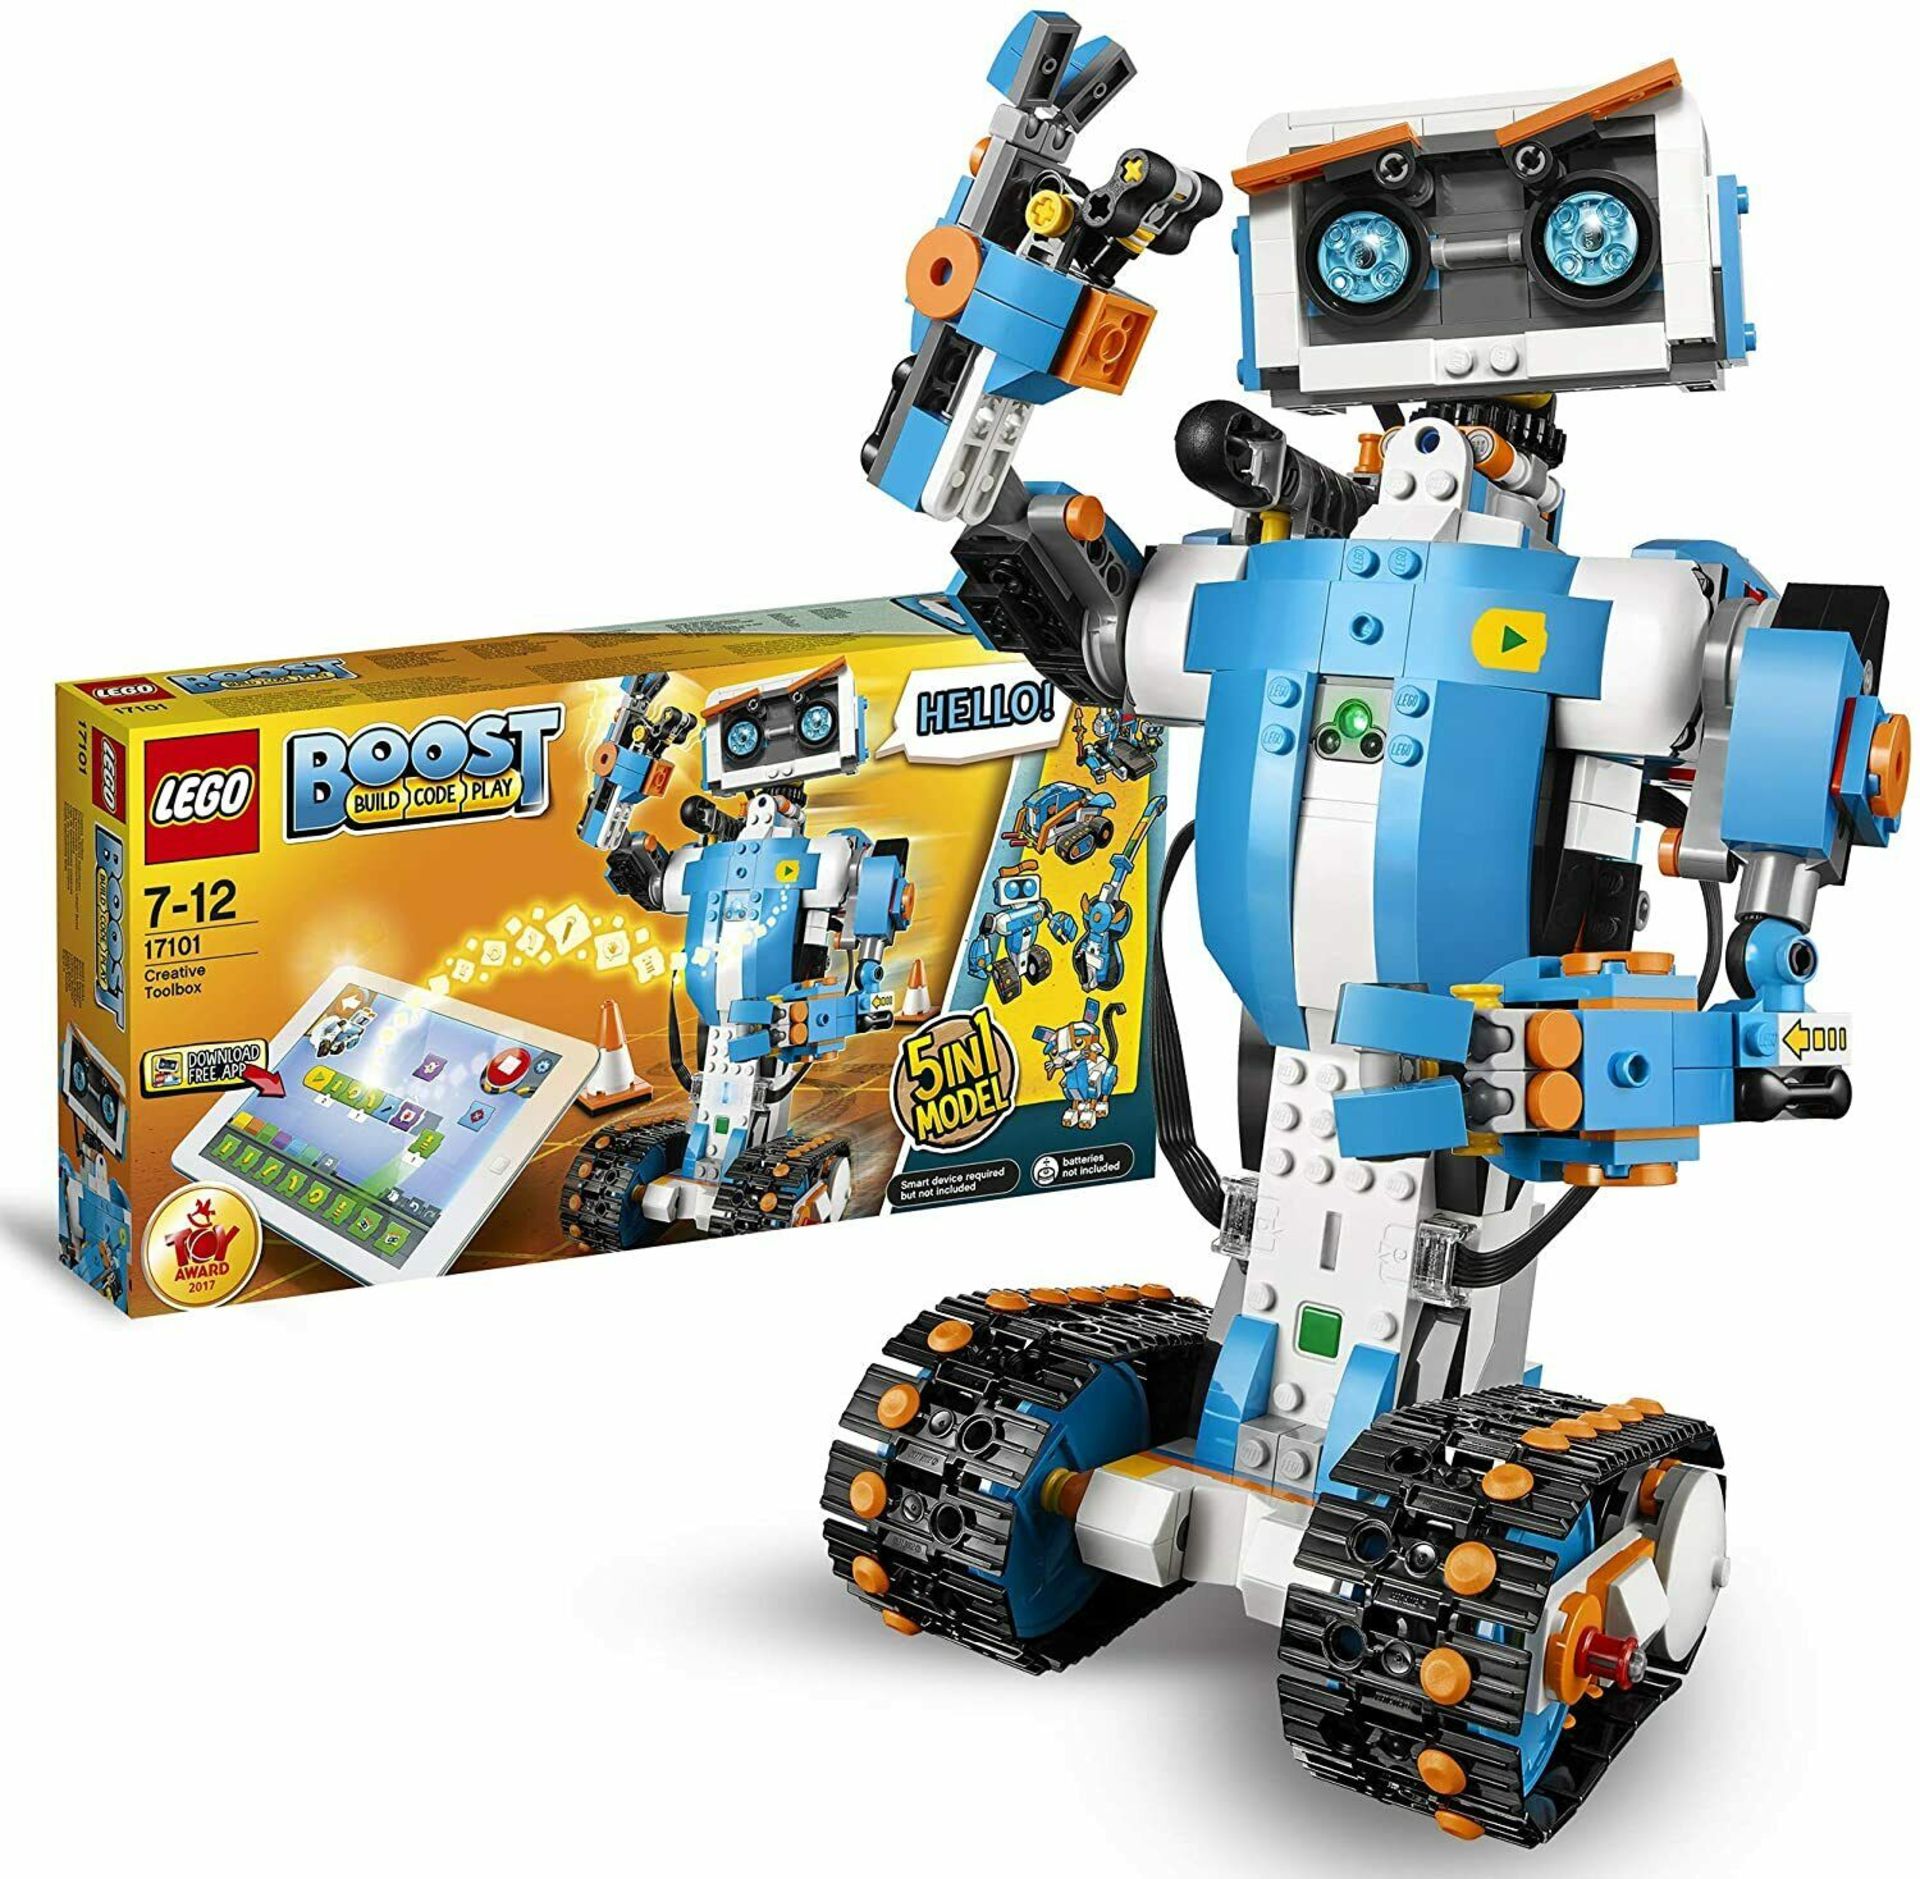 1 x Lego Boost 17101 Creative Toolbox - Build, Code and Play - 5 in 1 Robotics Lego Kit - Unused and